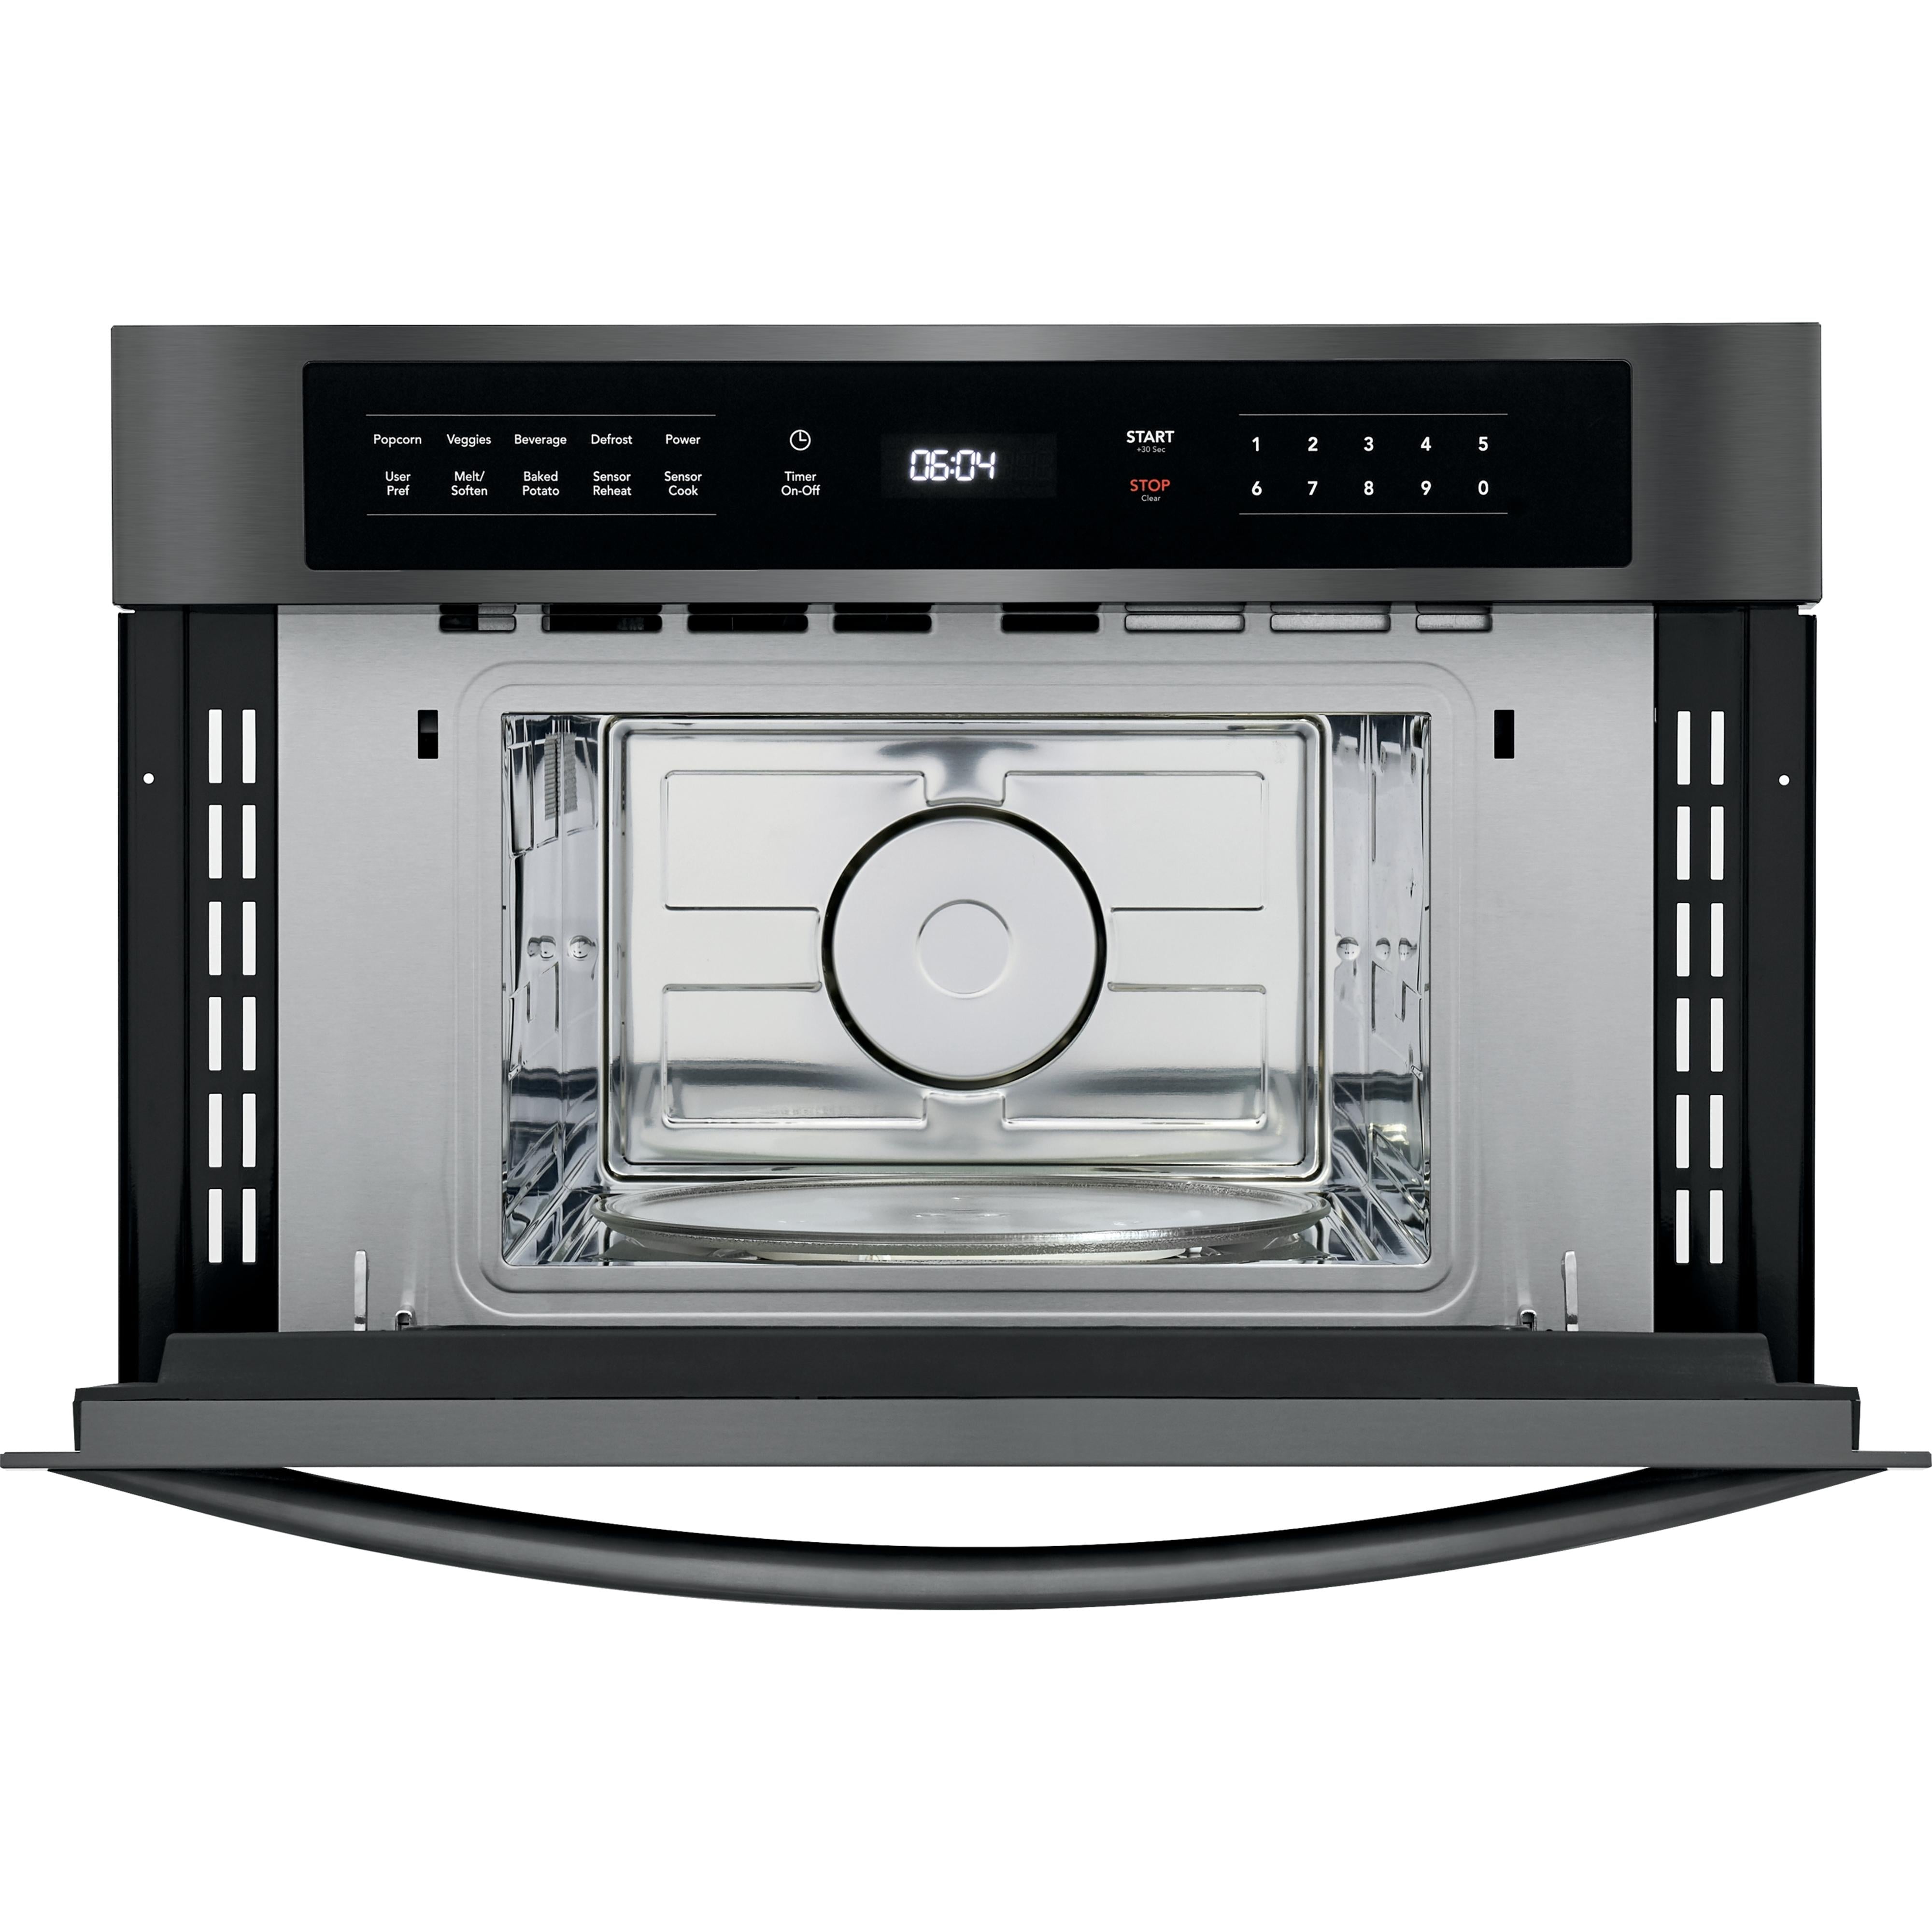 Frigidaire Gallery 30-inch, 1.6 cu. ft. Built-In Microwave Oven FGMO3067UD